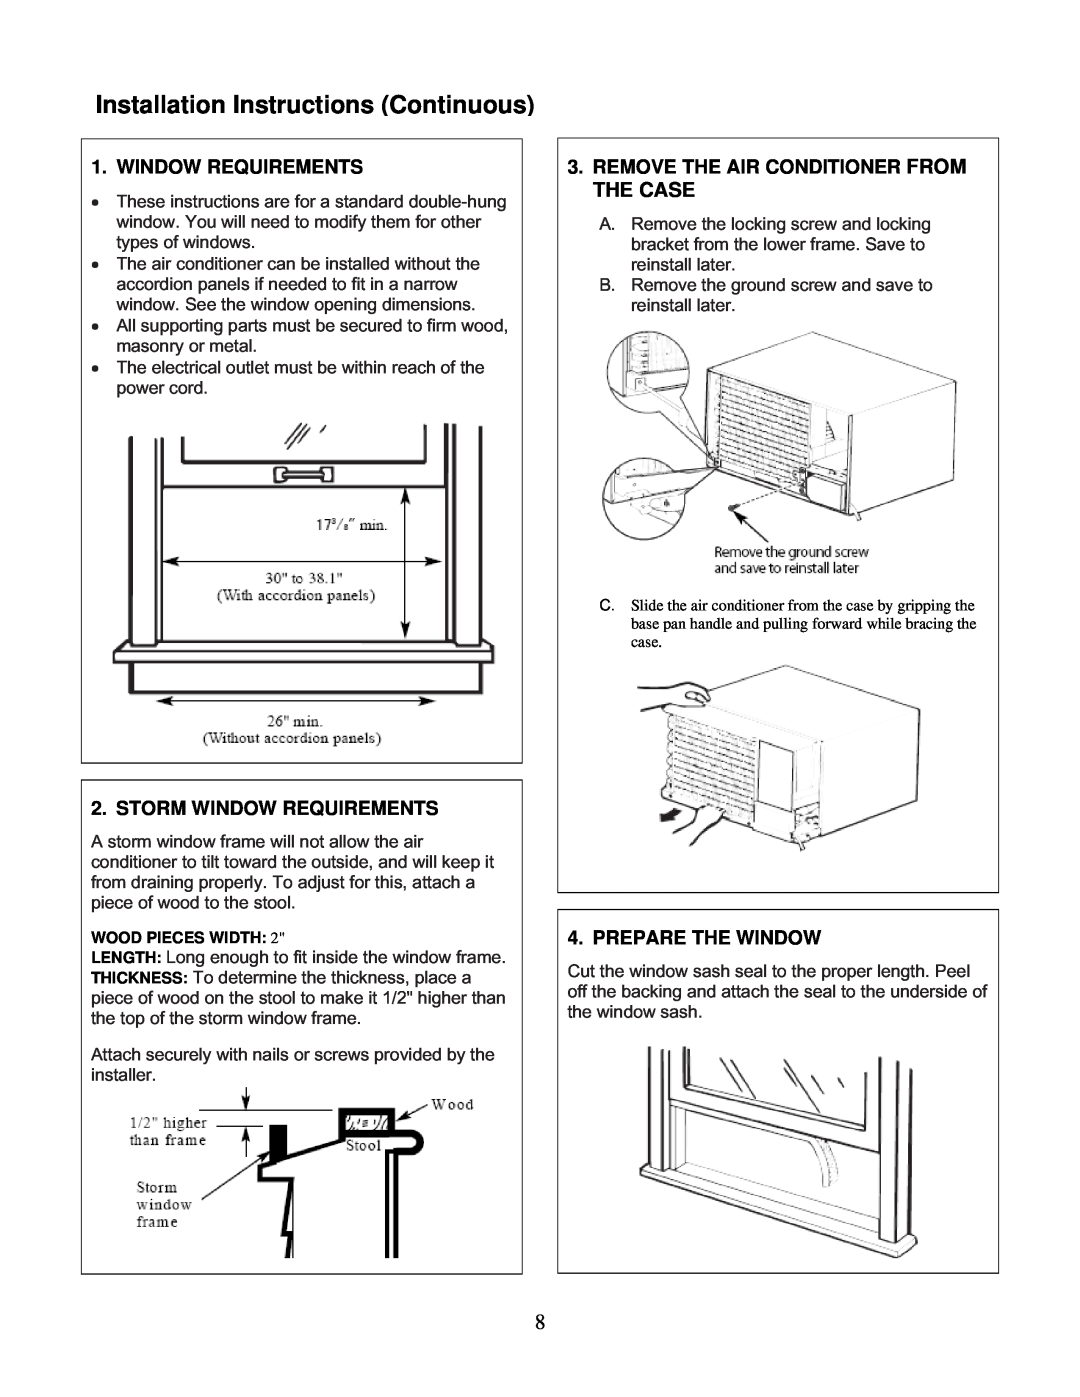 Soleus Air KC-45H Installation Instructions Continuous, Storm Window Requirements, Prepare The Window 